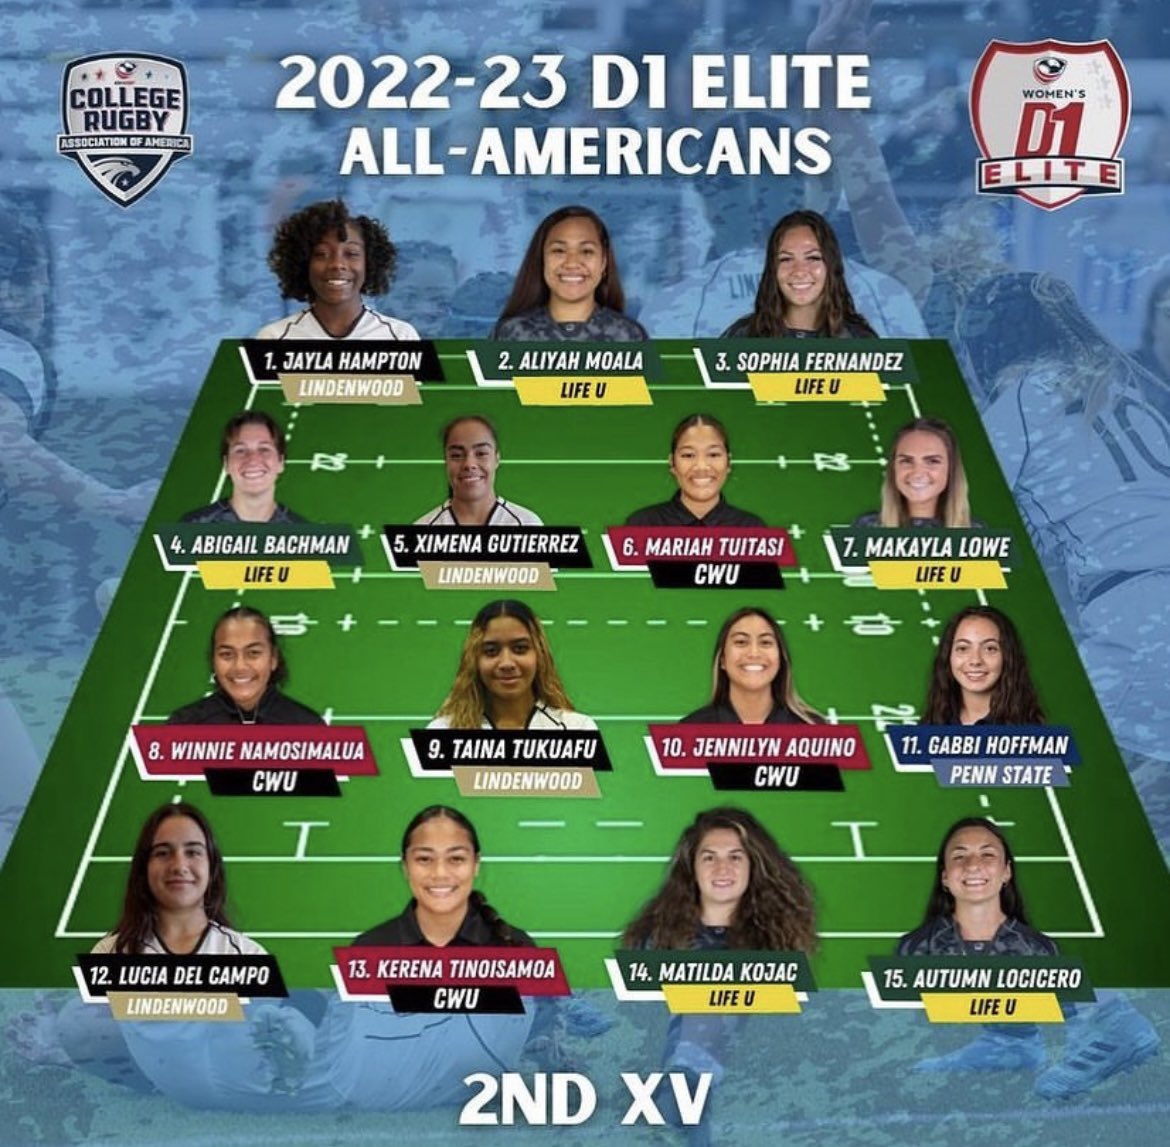 Proud of our girls that made the ‘22/‘23 D1 Elite All-American first and second team!